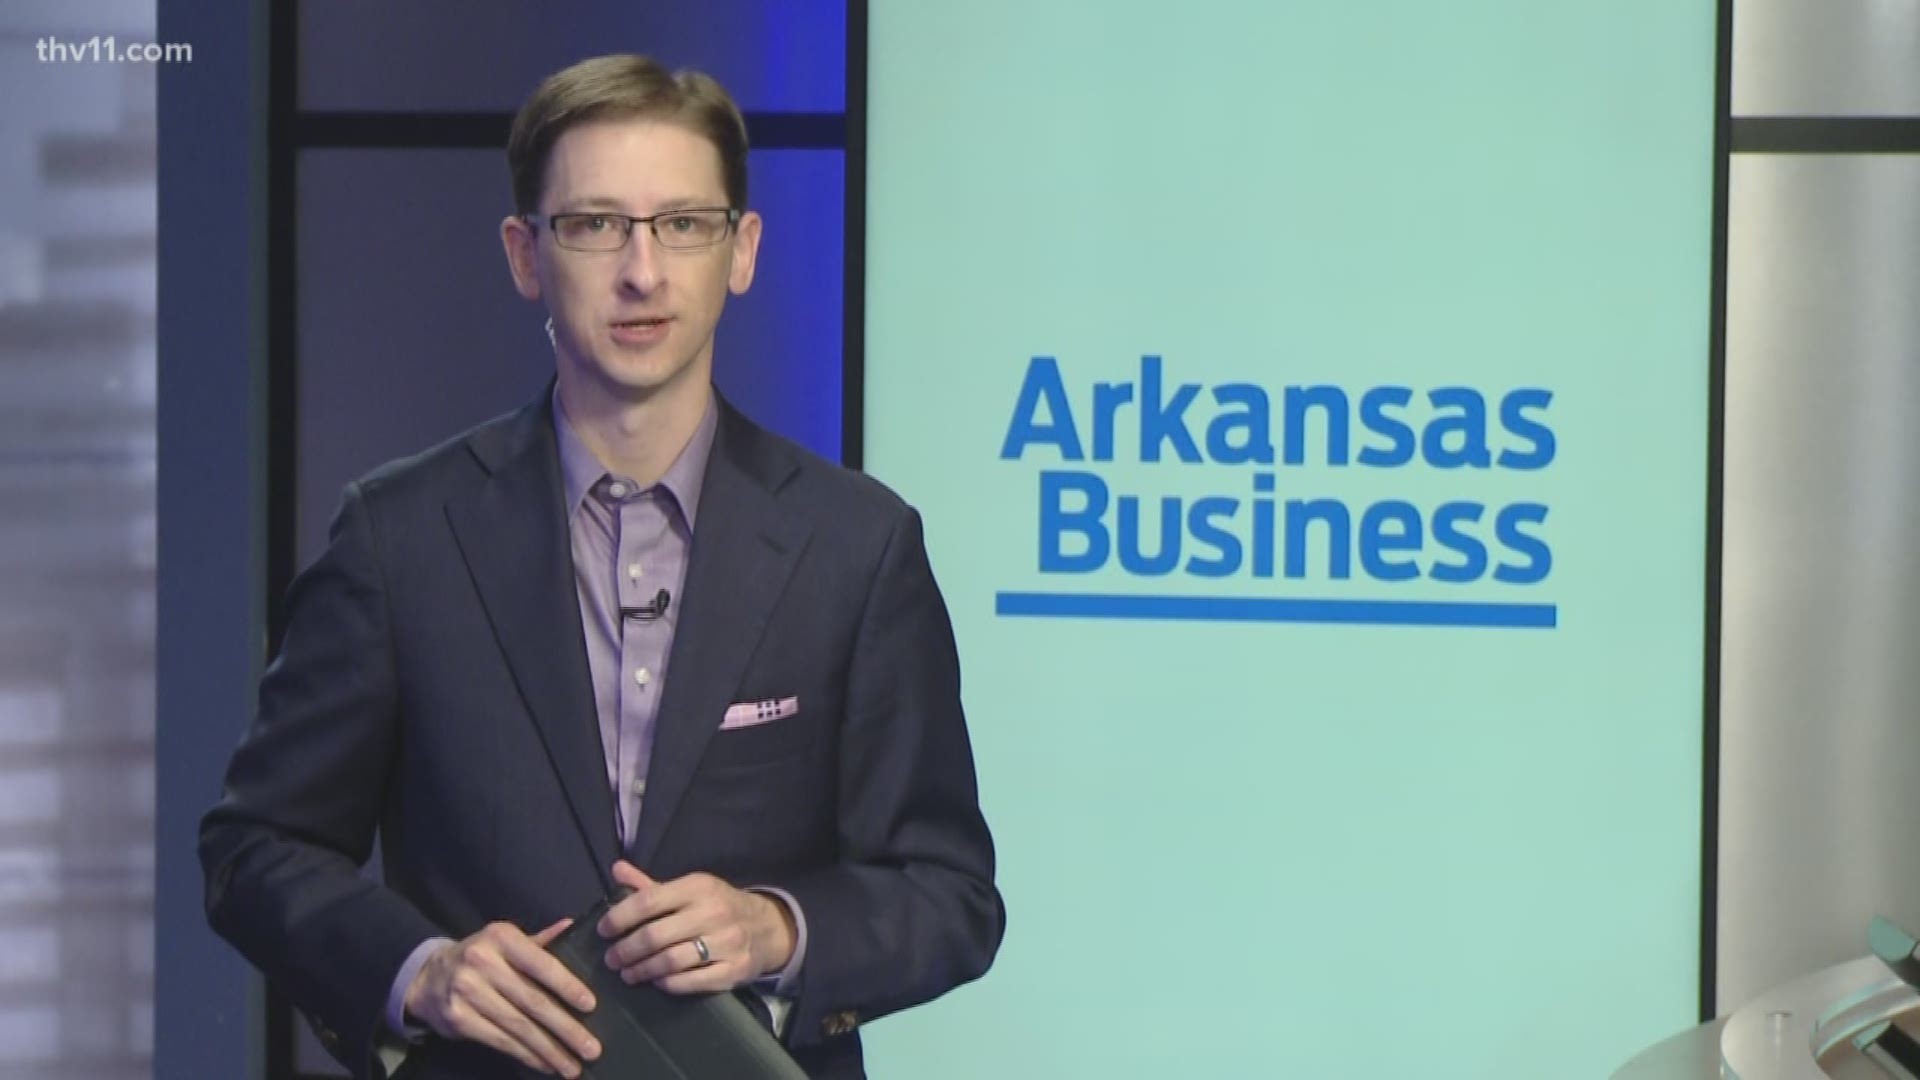 Your Arkansas Business for Monday, June 10